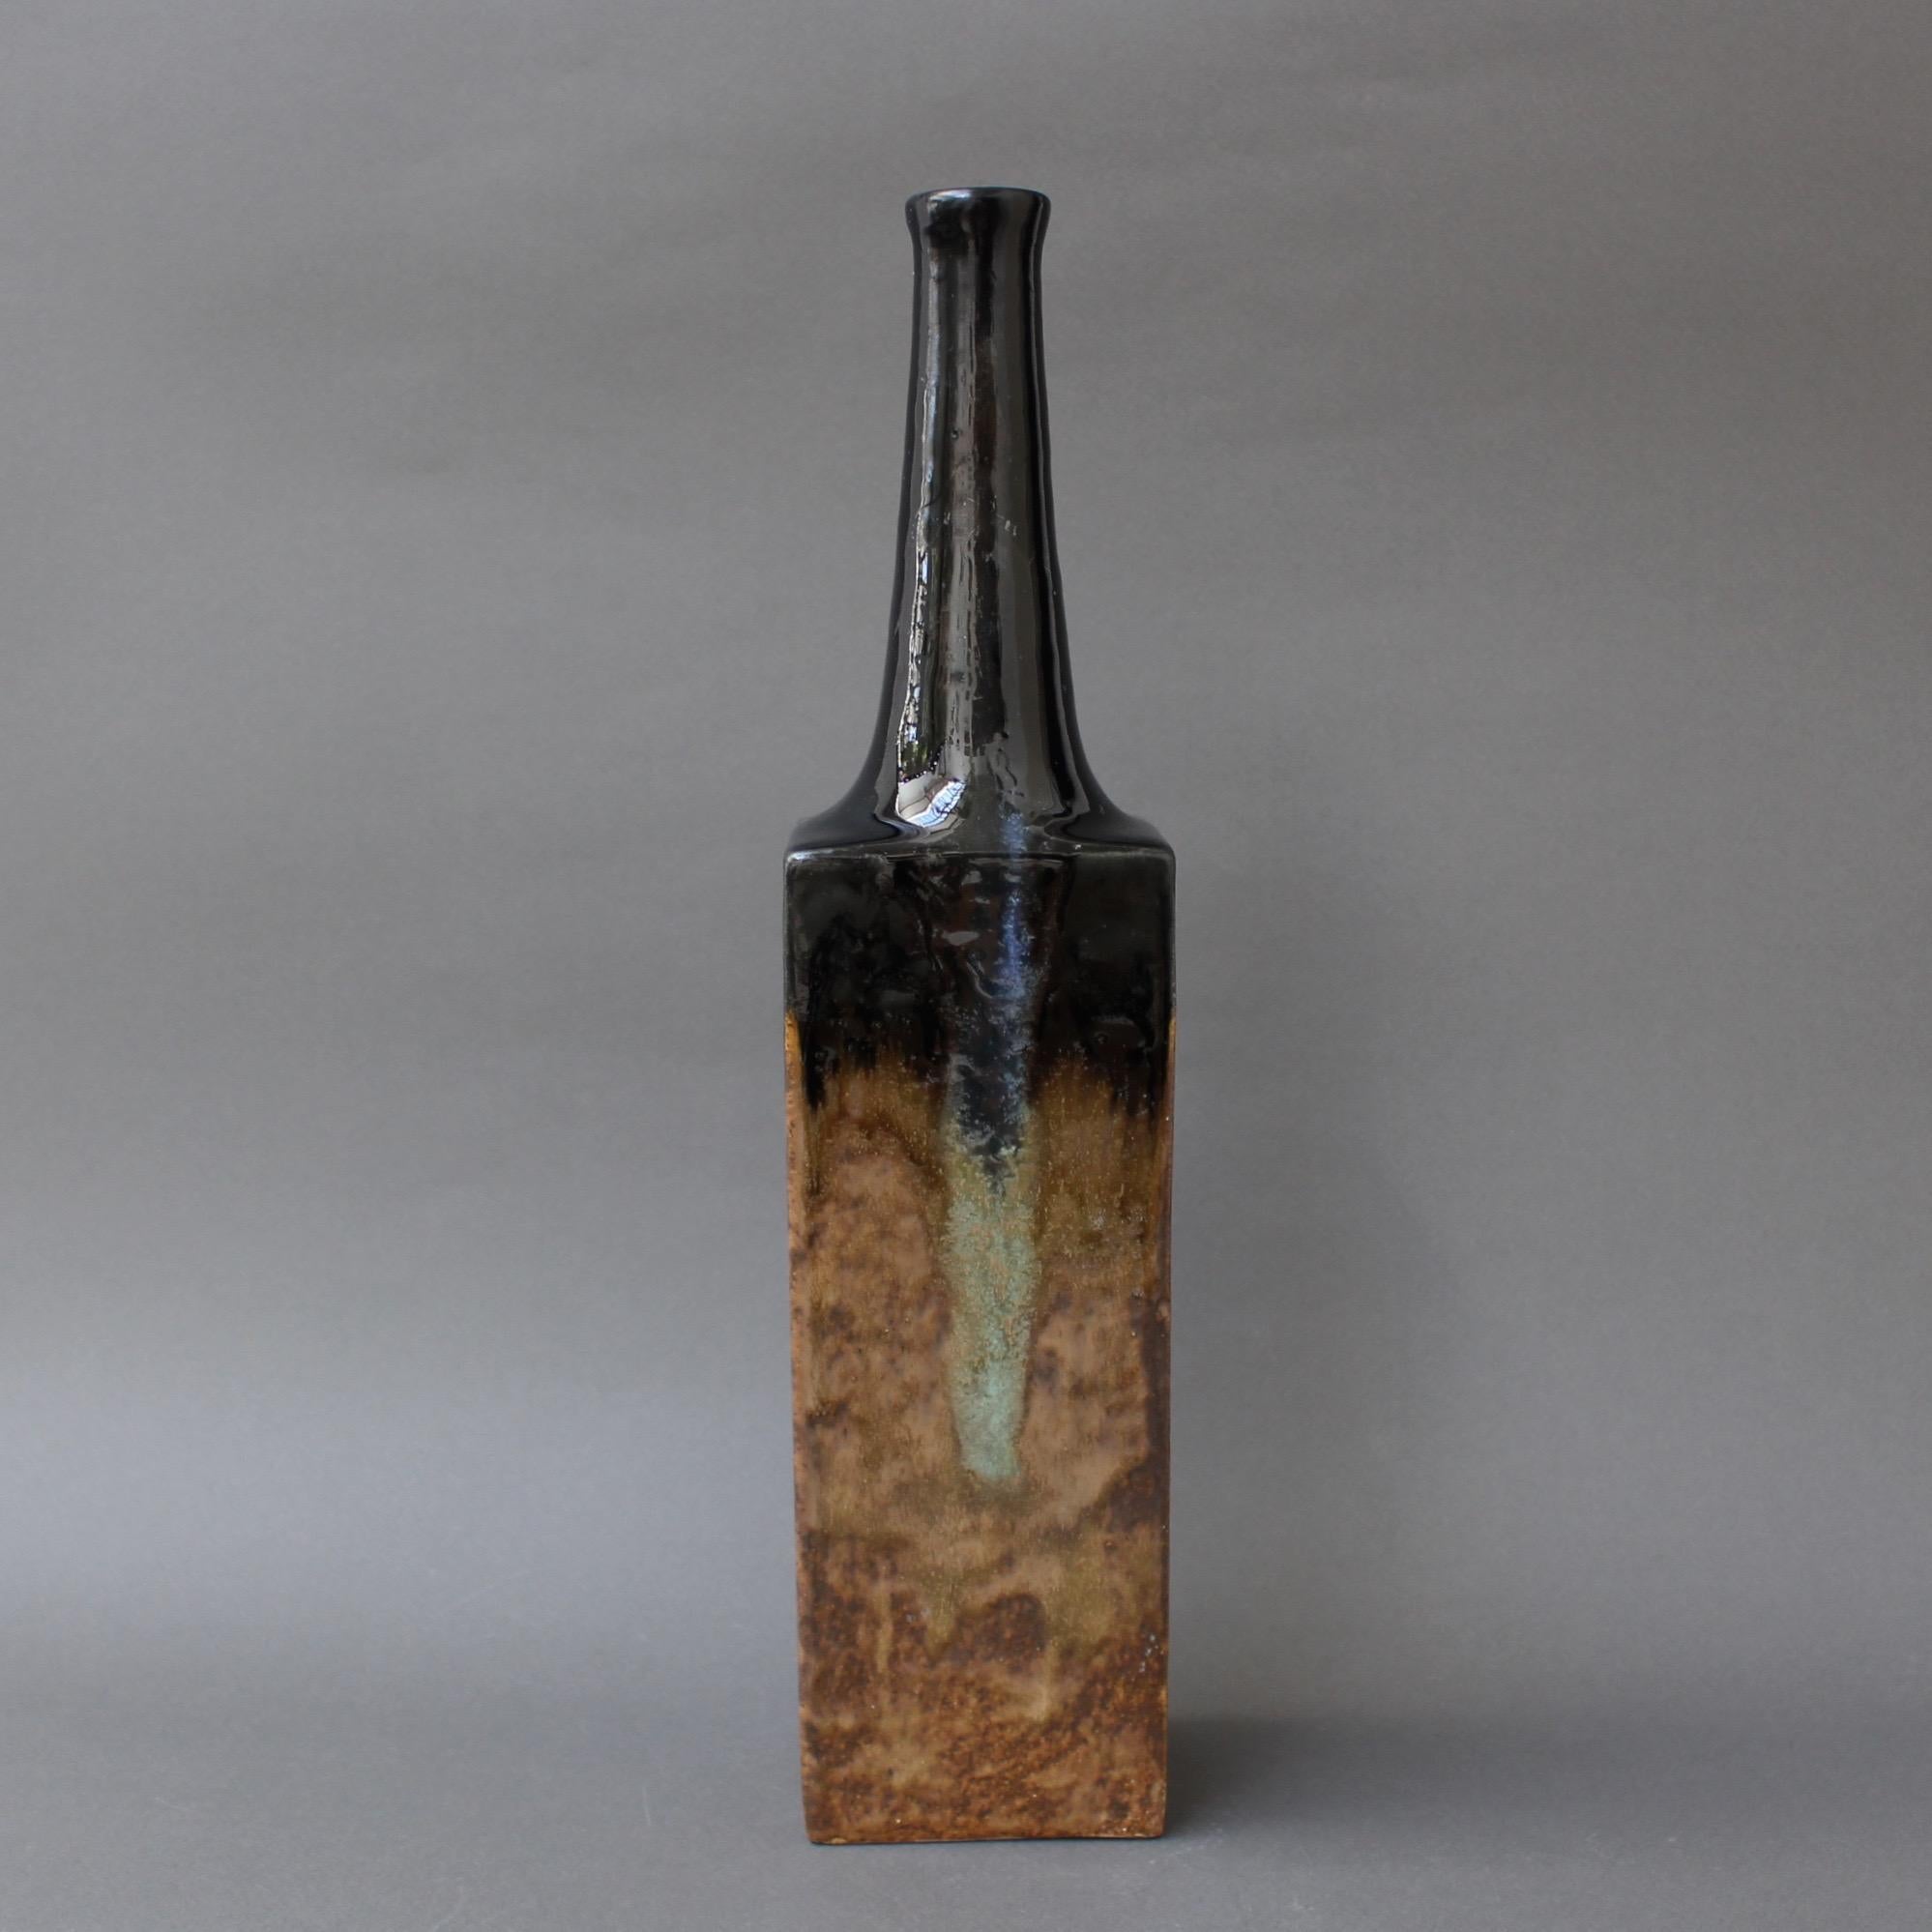 Italian Black and Chocolate Brown Ceramic Bottle-Shaped Vase by Bruno Gambone, c. 1980s For Sale